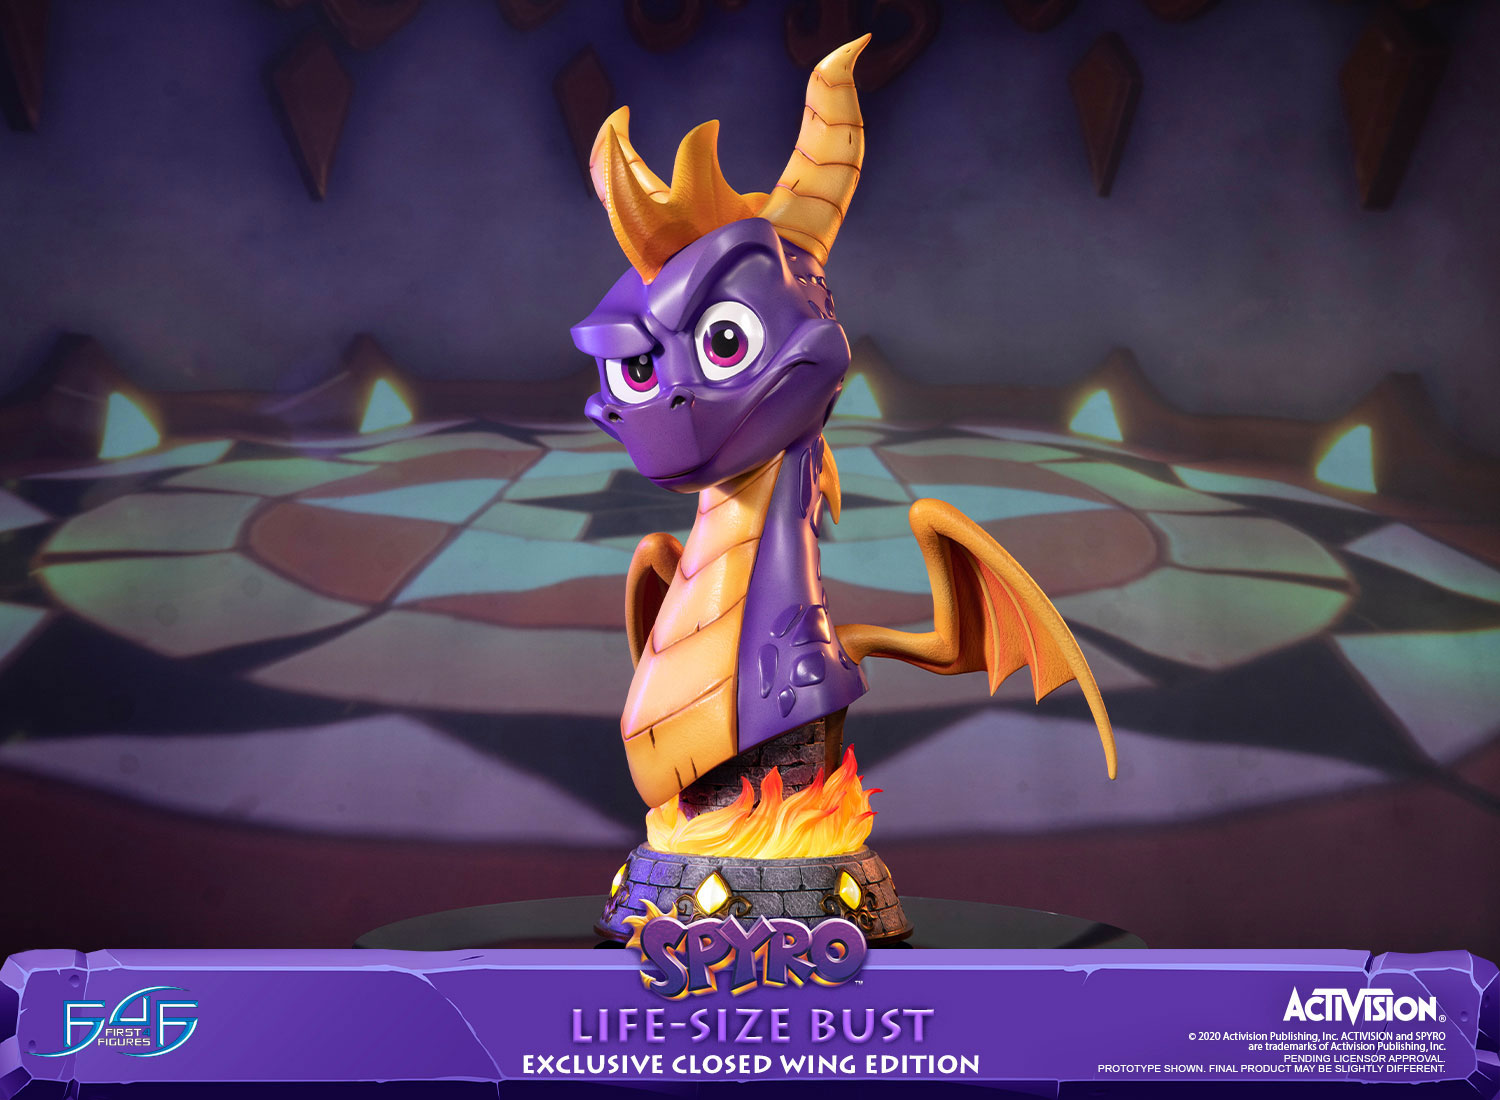 Spyro™ Life-Size Bust (Exclusive Closed Wing Edition)